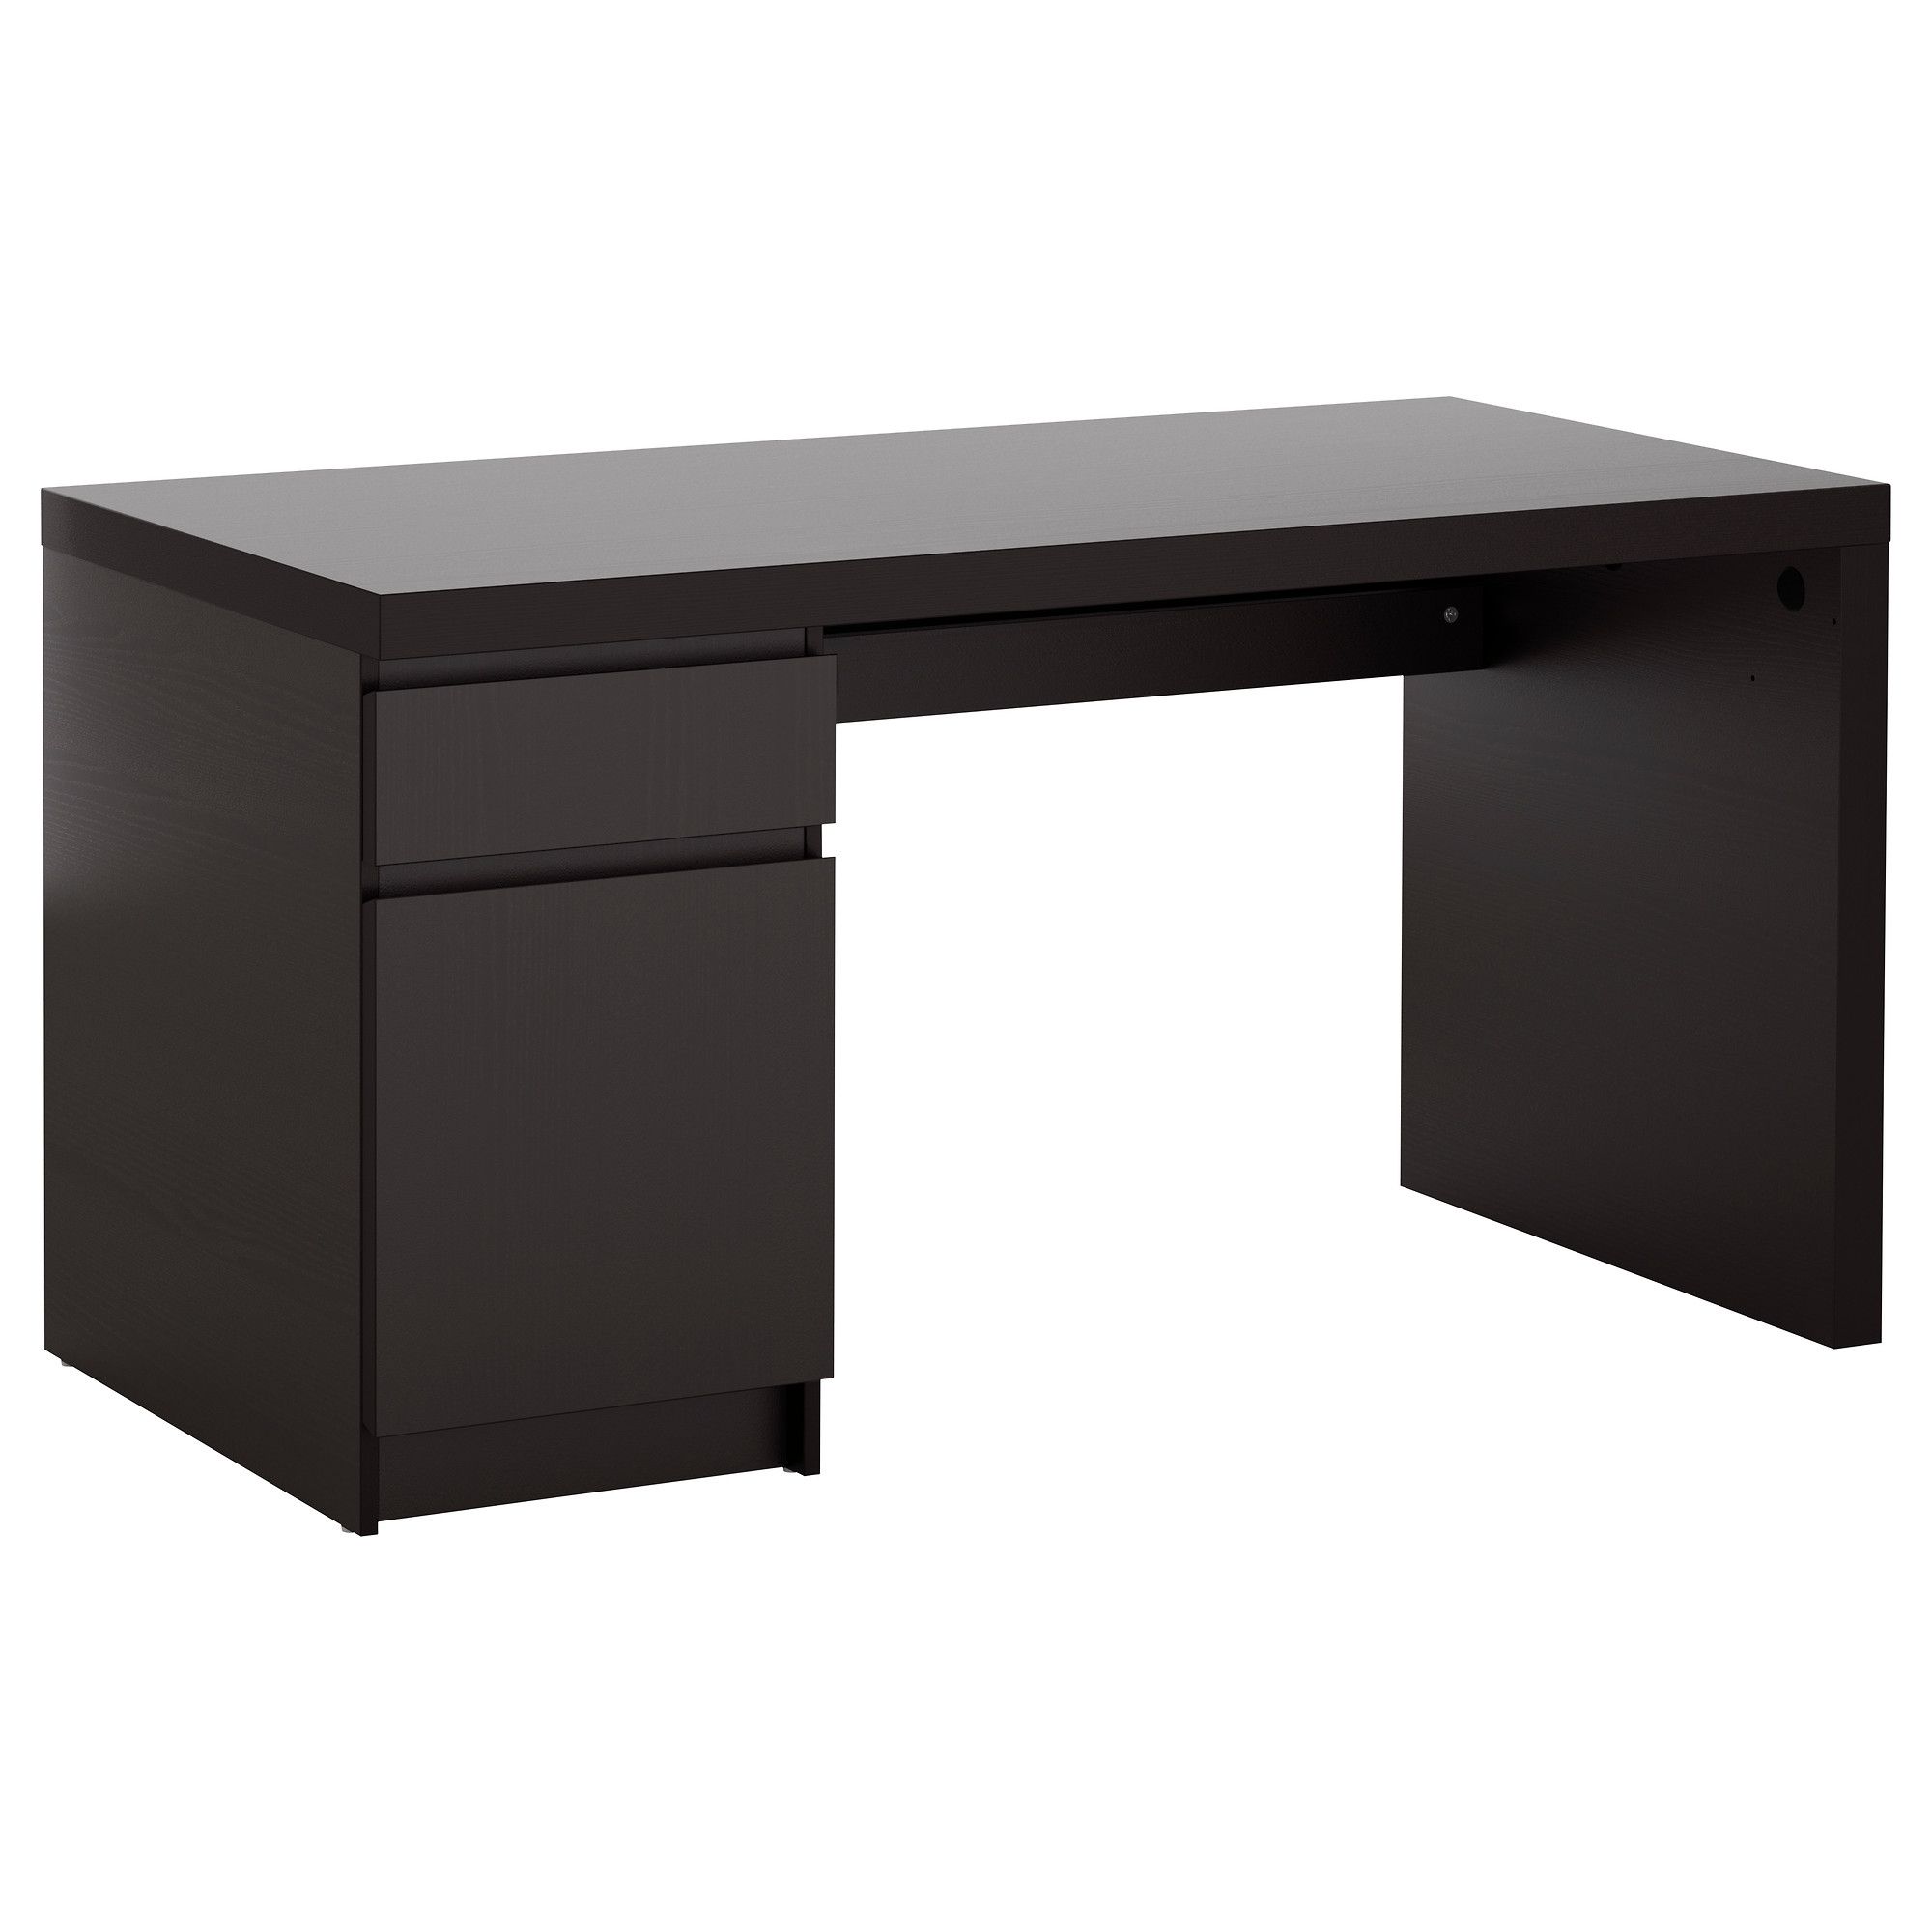 Widely Used Ikea Mn Computer Desks With Malm Desk – Black Brown – Ikea (View 19 of 20)